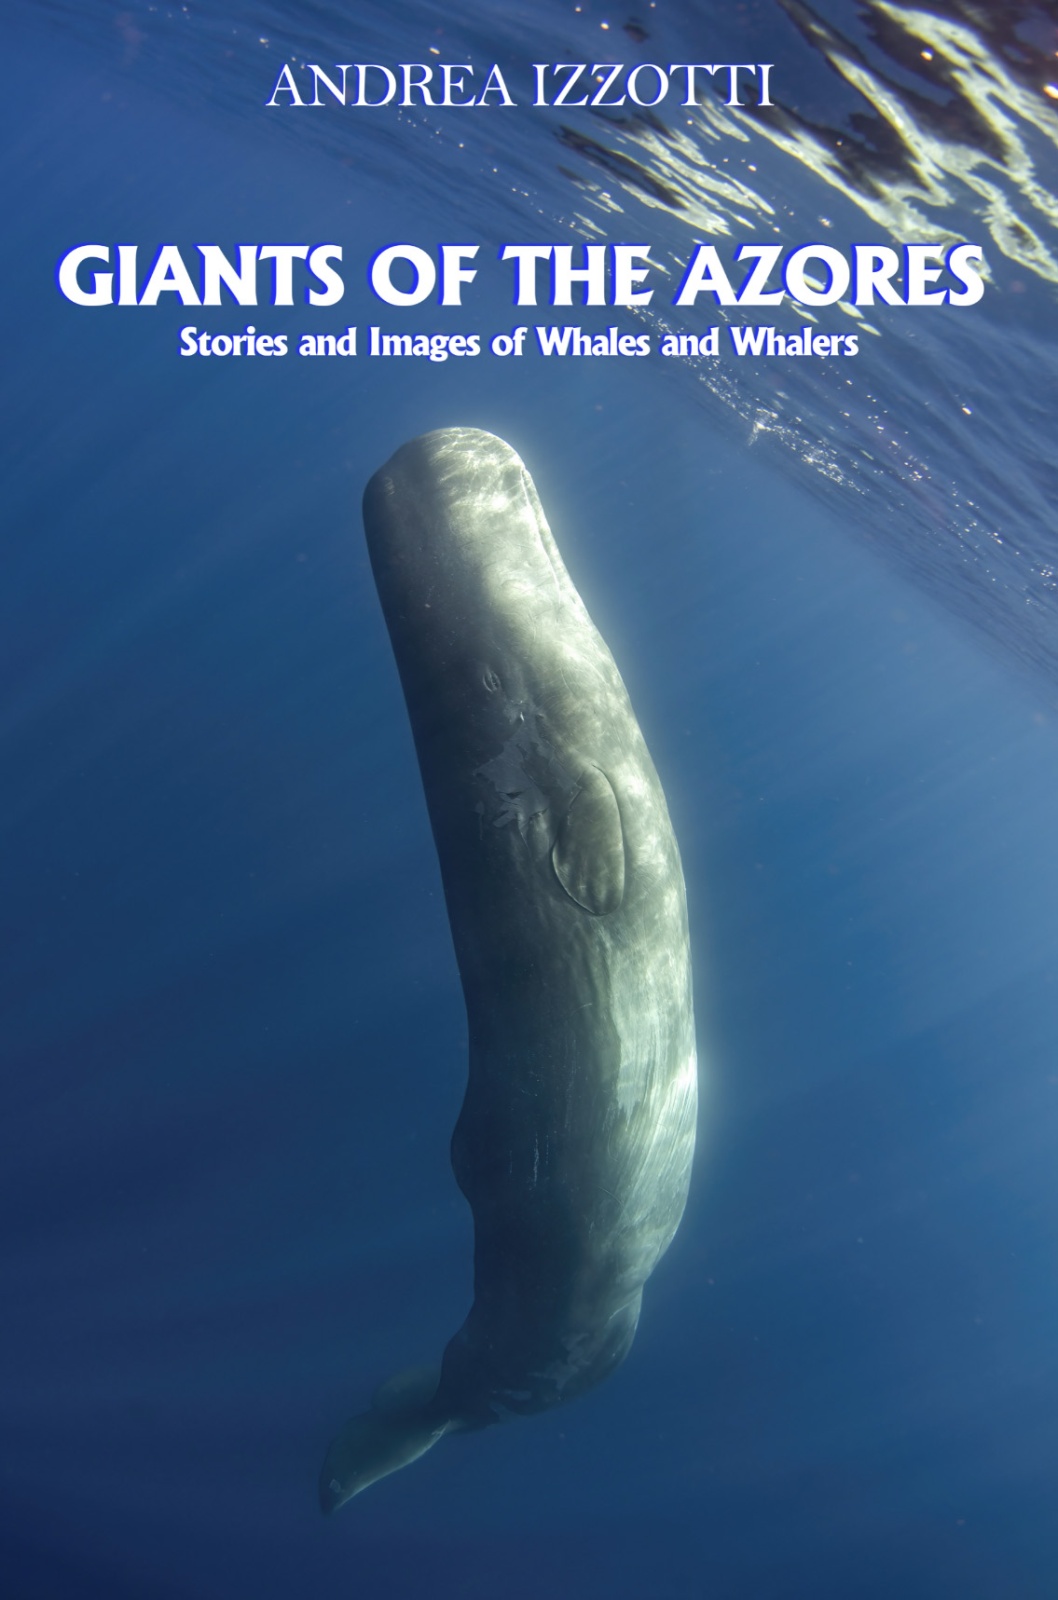 Giants of the Azores: Stories and Images of Whales and Whalers